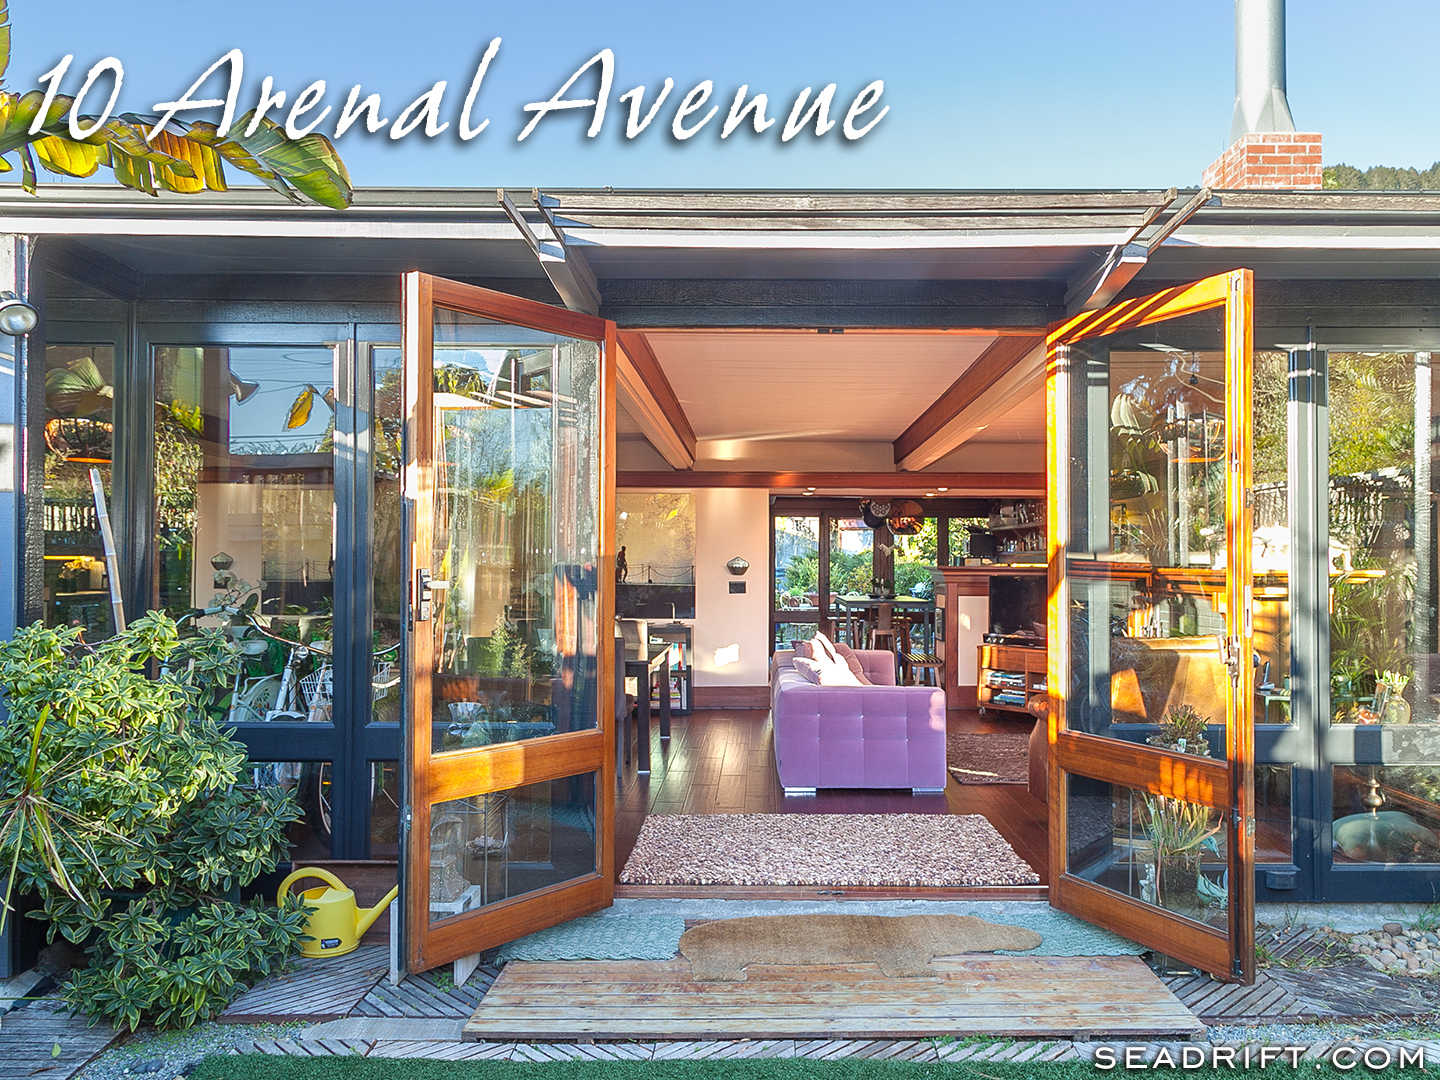 10 Arenal Avenue, Stinson Beach — View of front of house